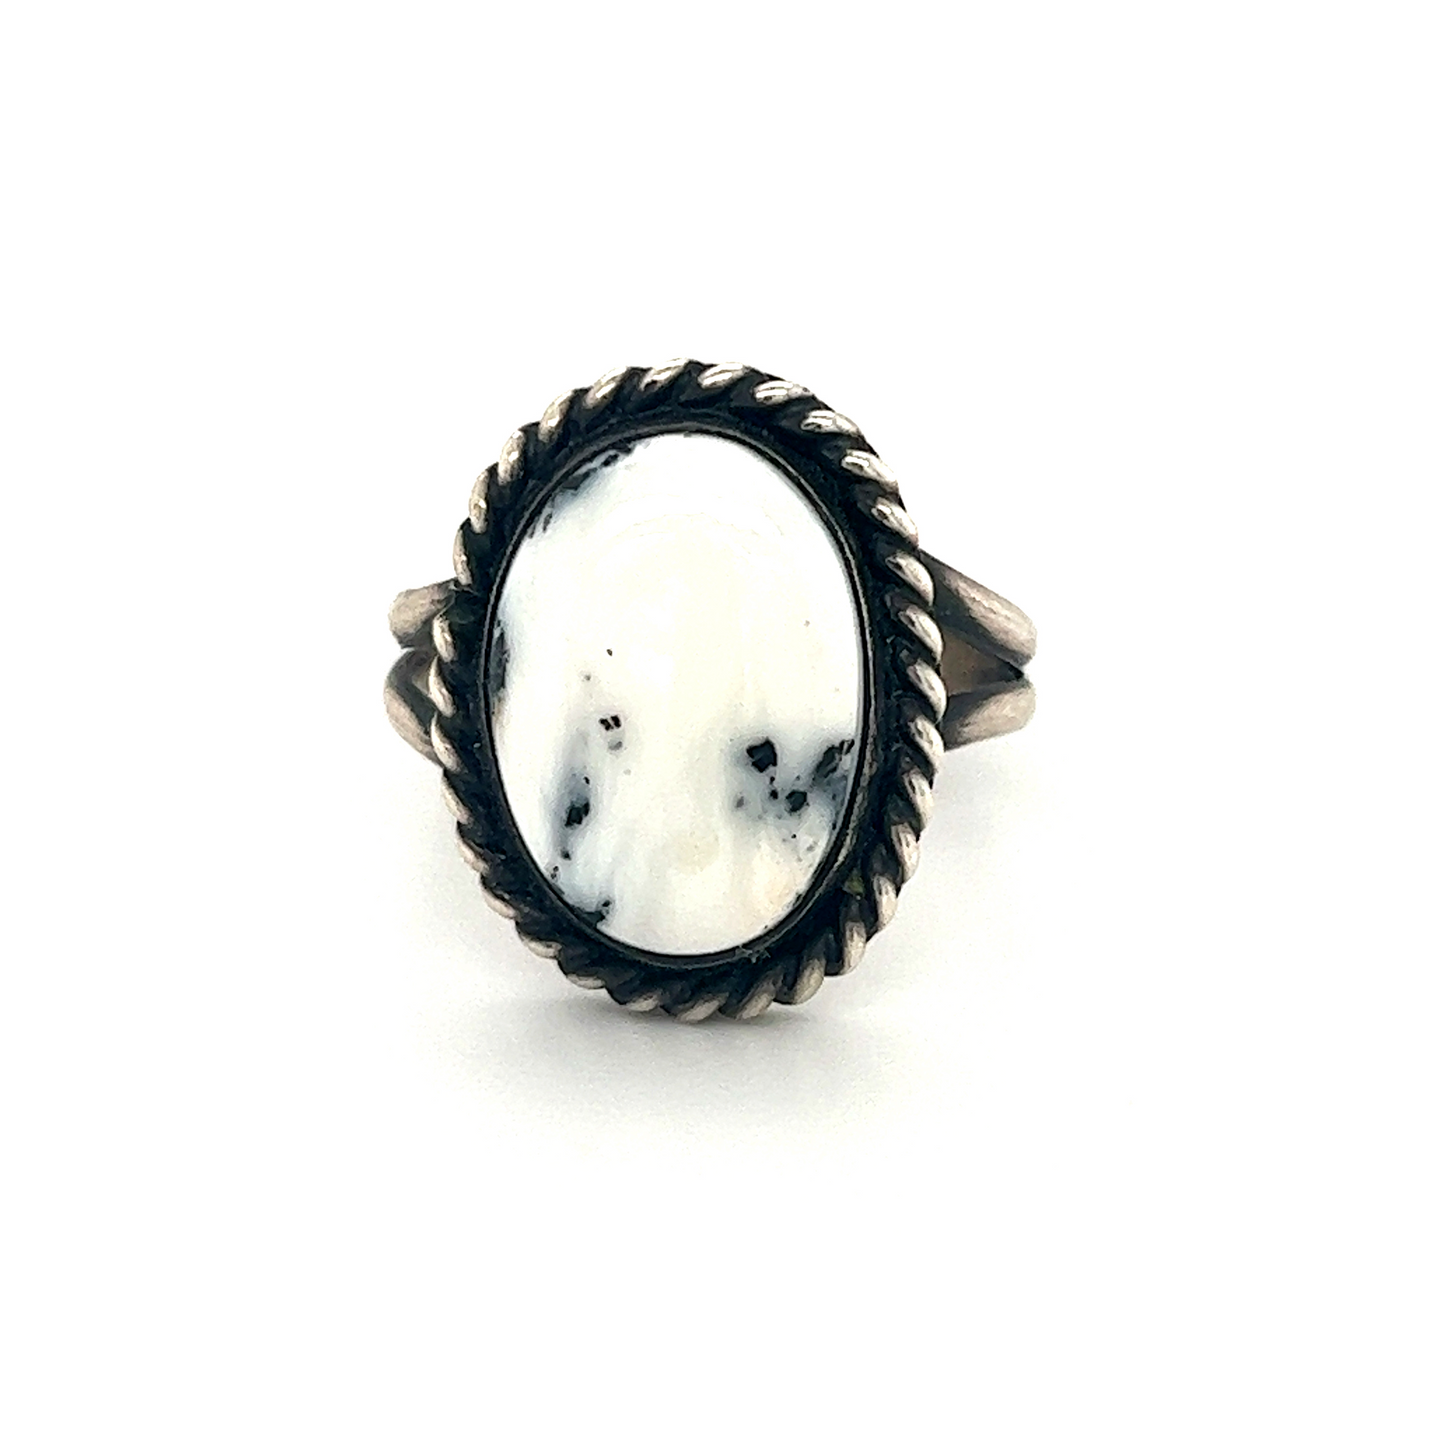 A cultural Unique White Buffalo Turquoise ring with a white stone in the center.